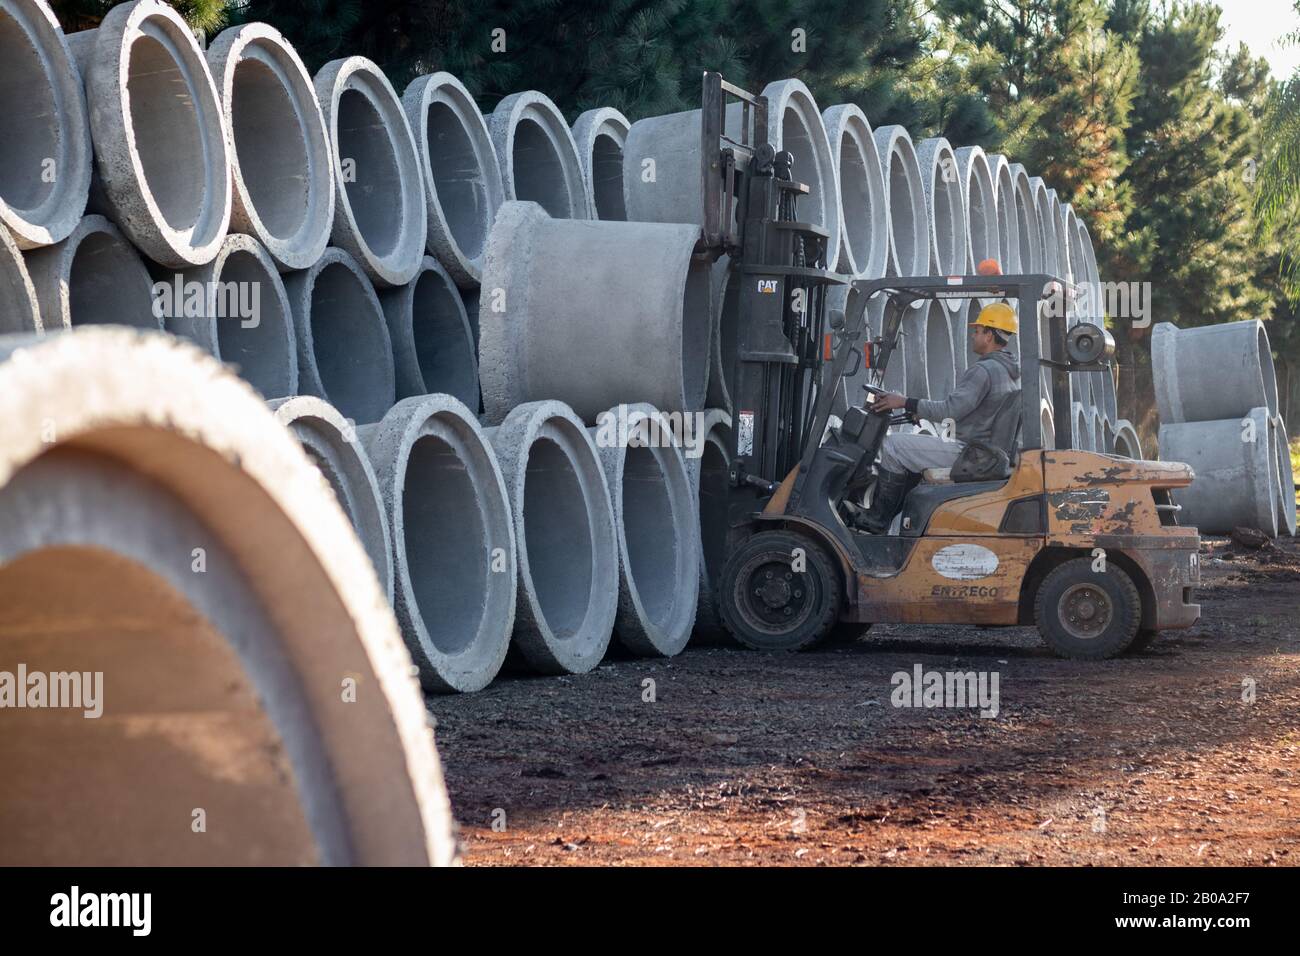 A forklift carrying sewer pipes Stock Photo